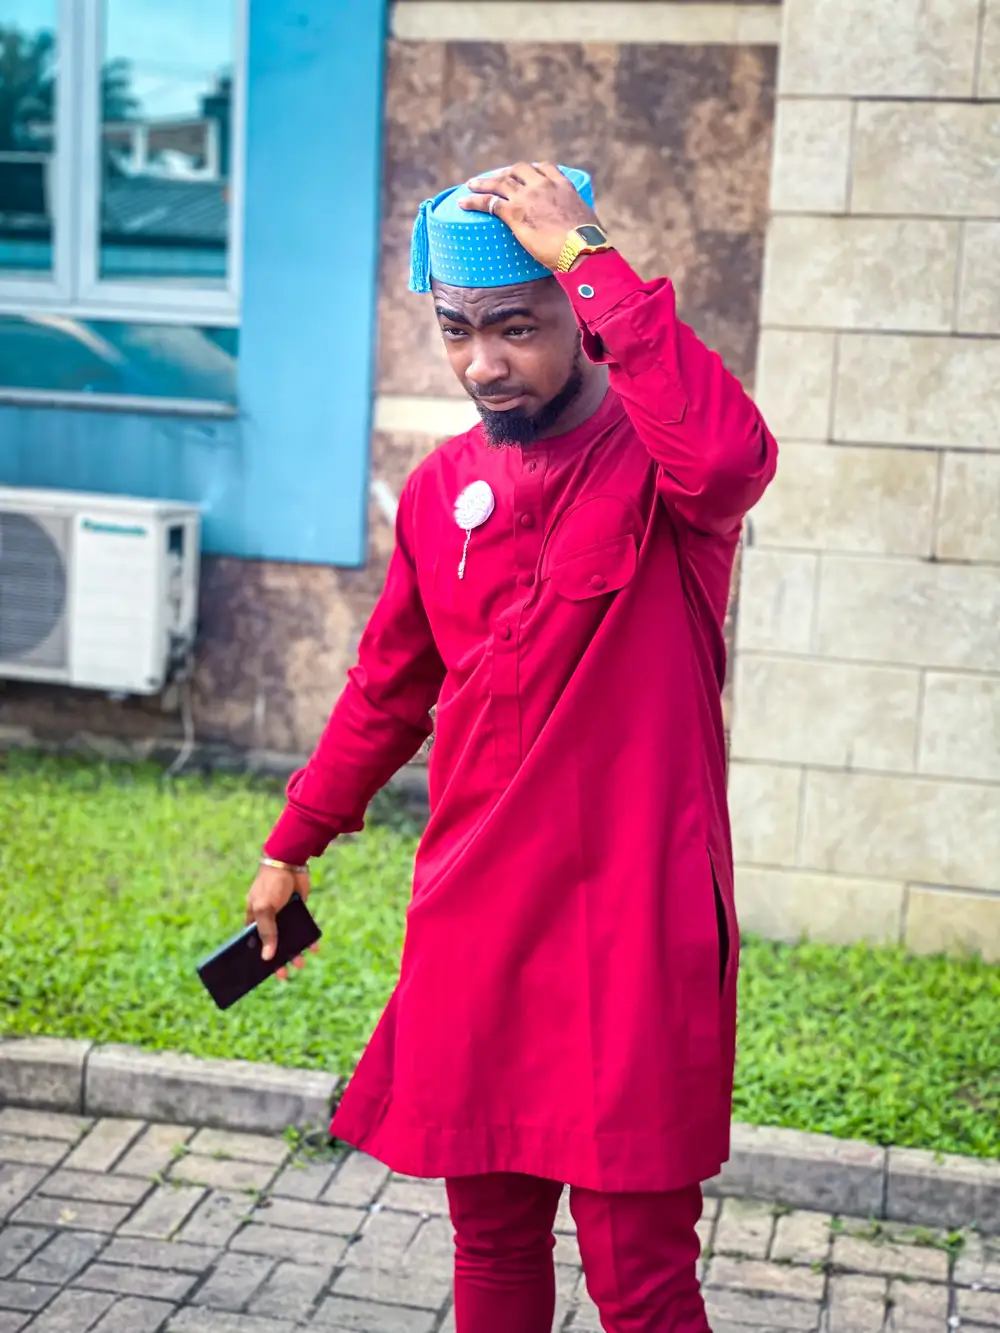 Man wearing Red traditional attire